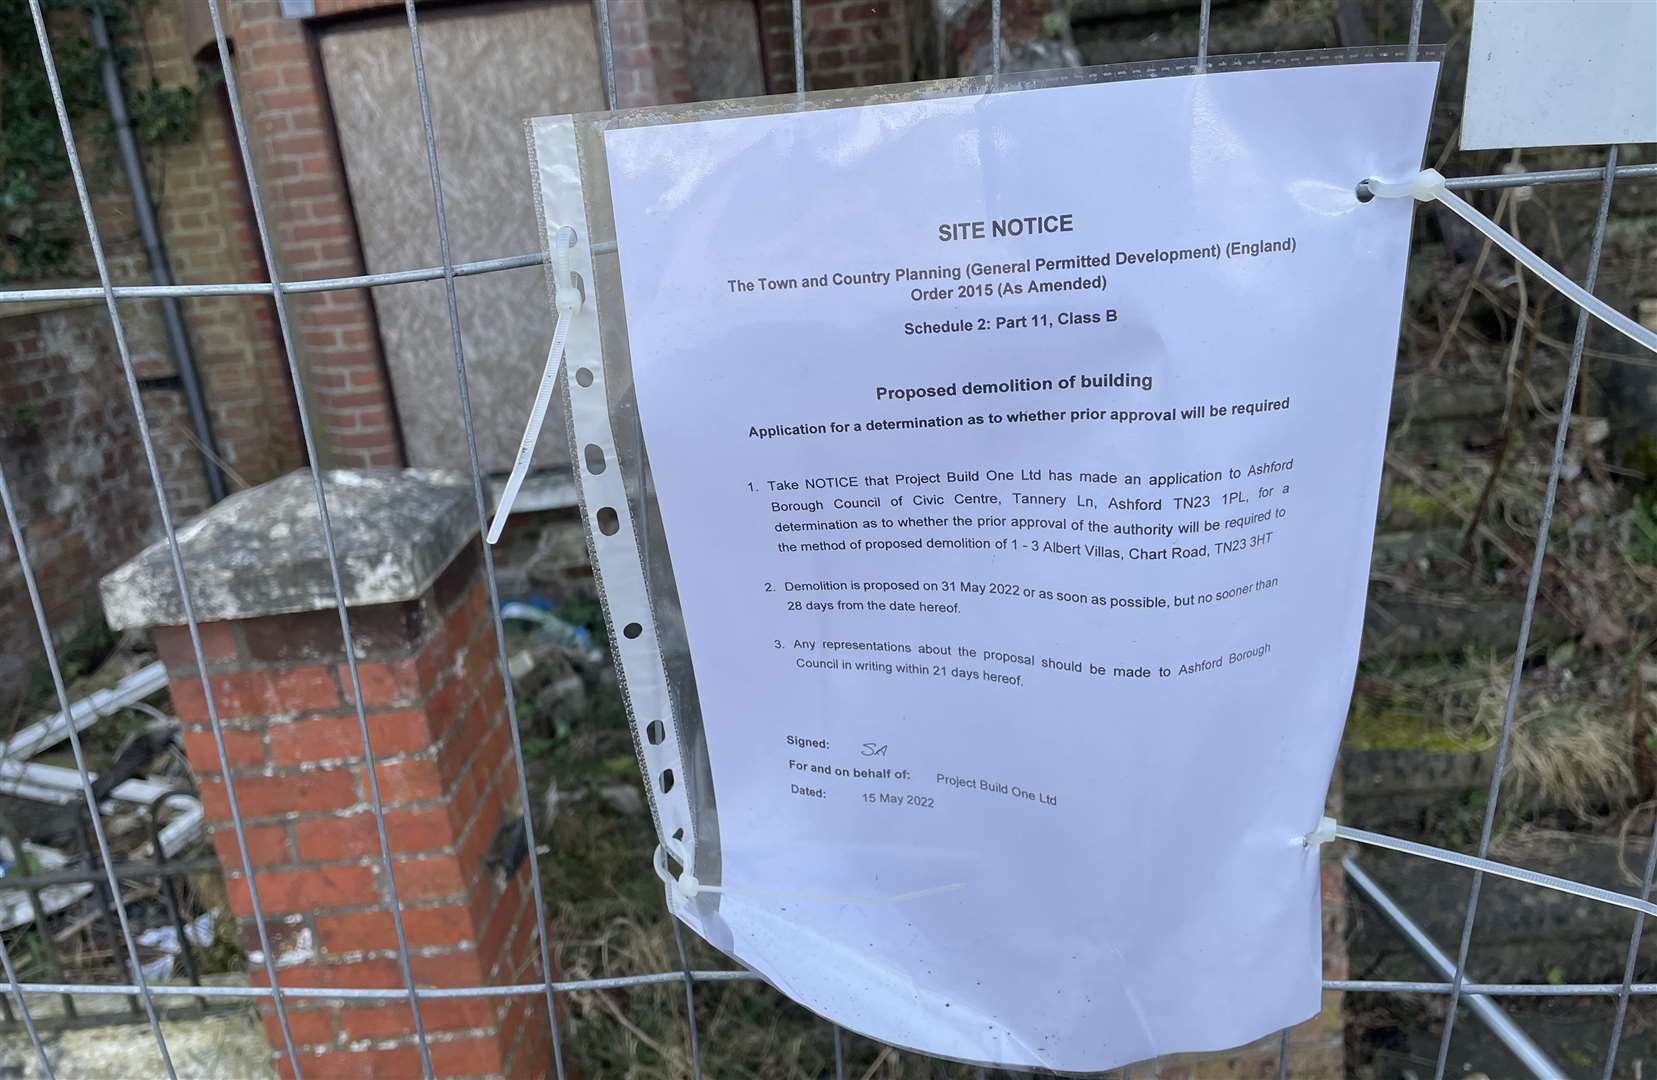 A demolition notice was attached to the building in March